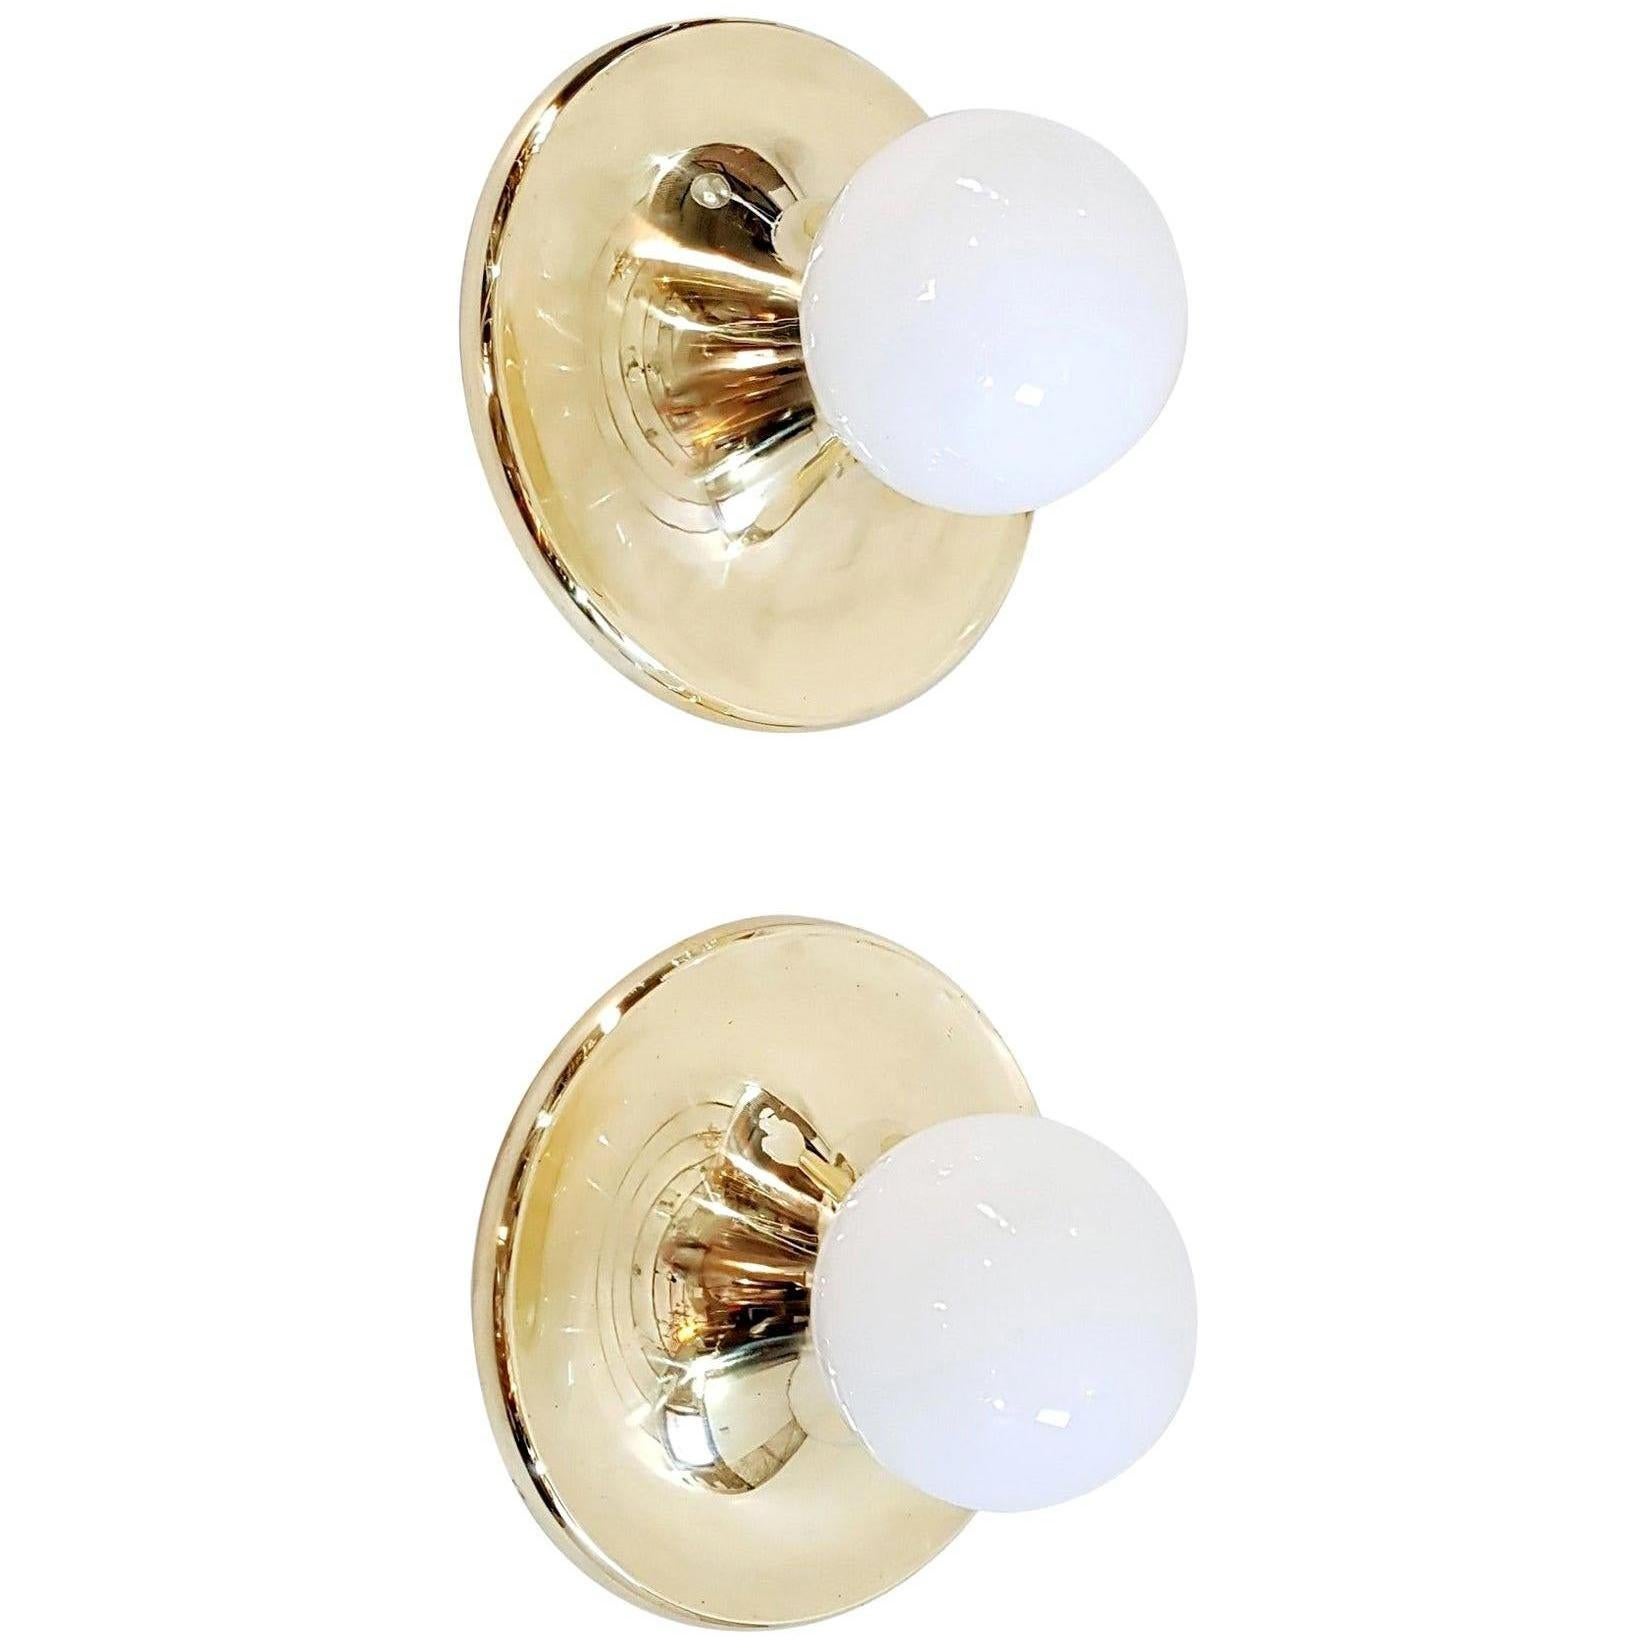 A large pair of lamps that can be used as flushmounts or wall sconces by Achille & Pier Giacomo Castiglioni for Flos. Designed and manufactured in Italy, 1965. Brass and opaline glass. Each light takes one E27 bulb. The brass has been professionally